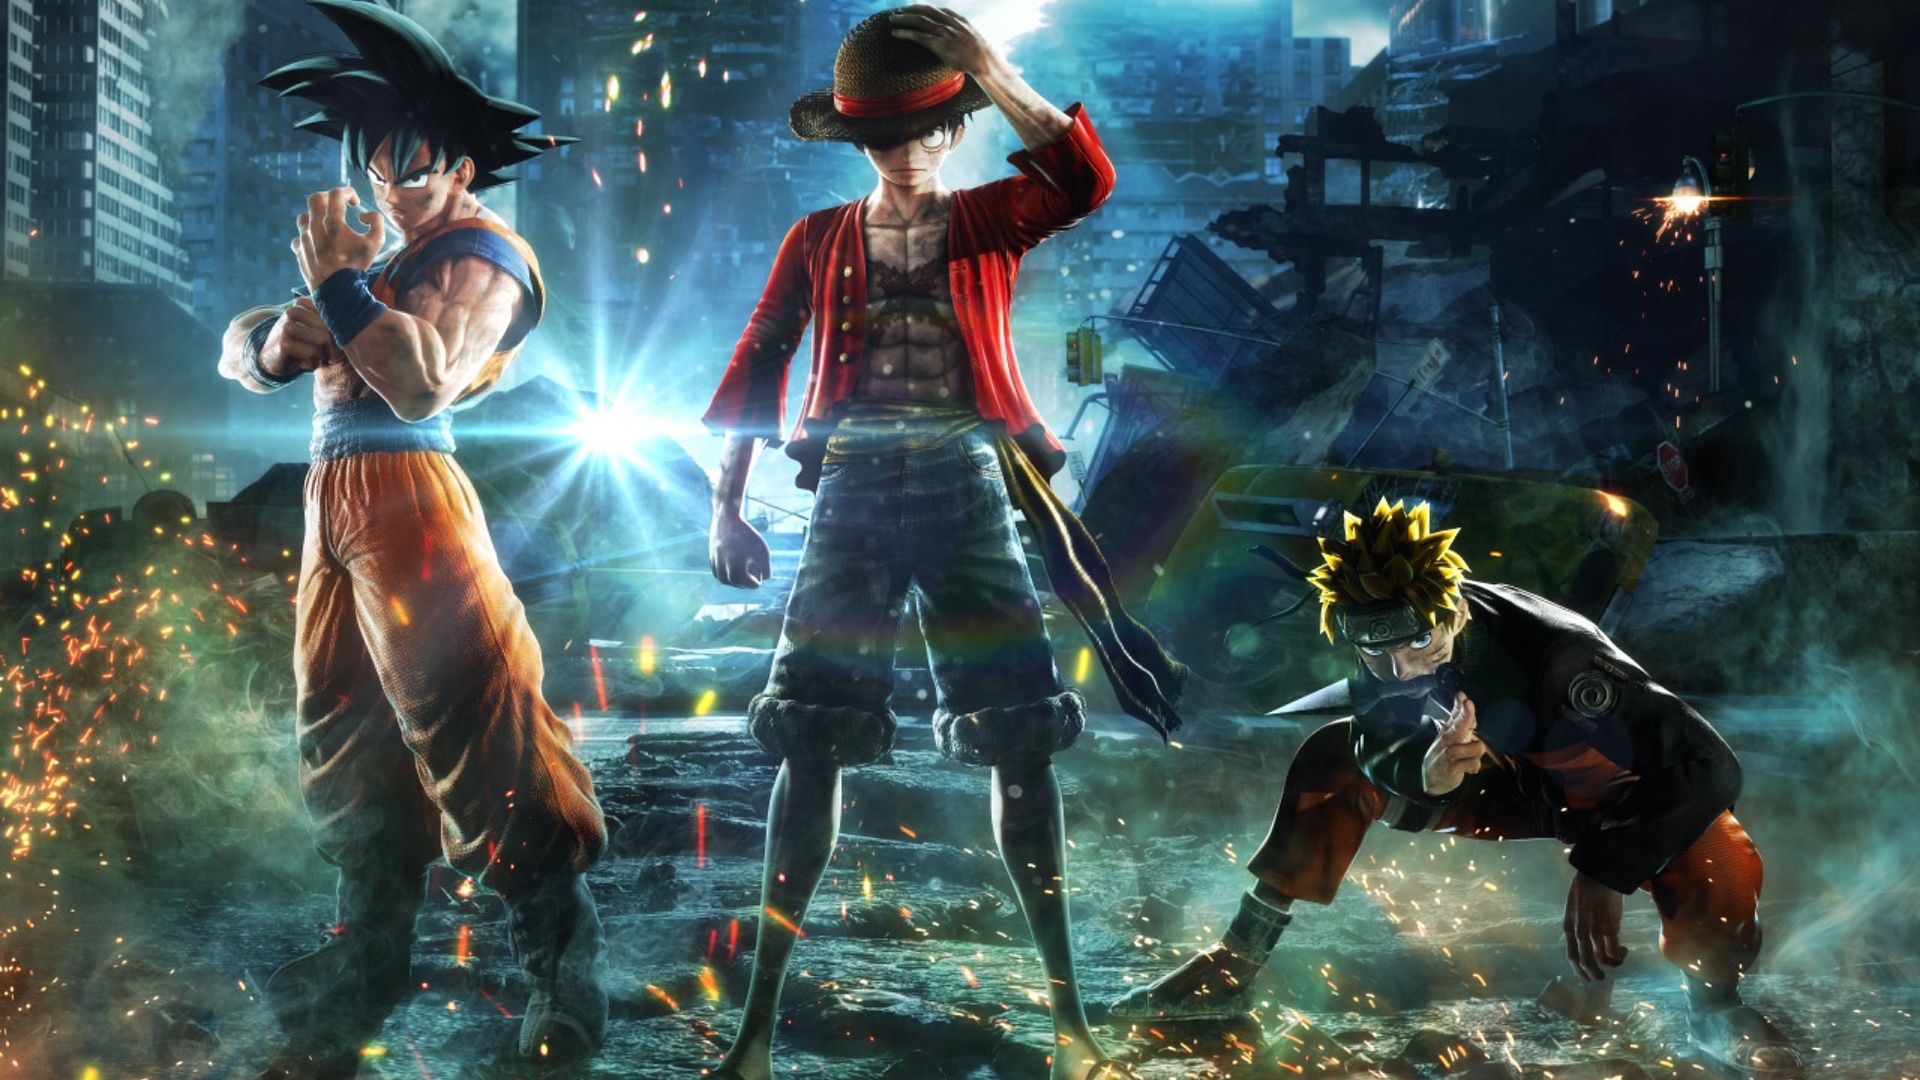 Naruto, Goku, Luffy, And More Anime Characters Team Up In Crazy